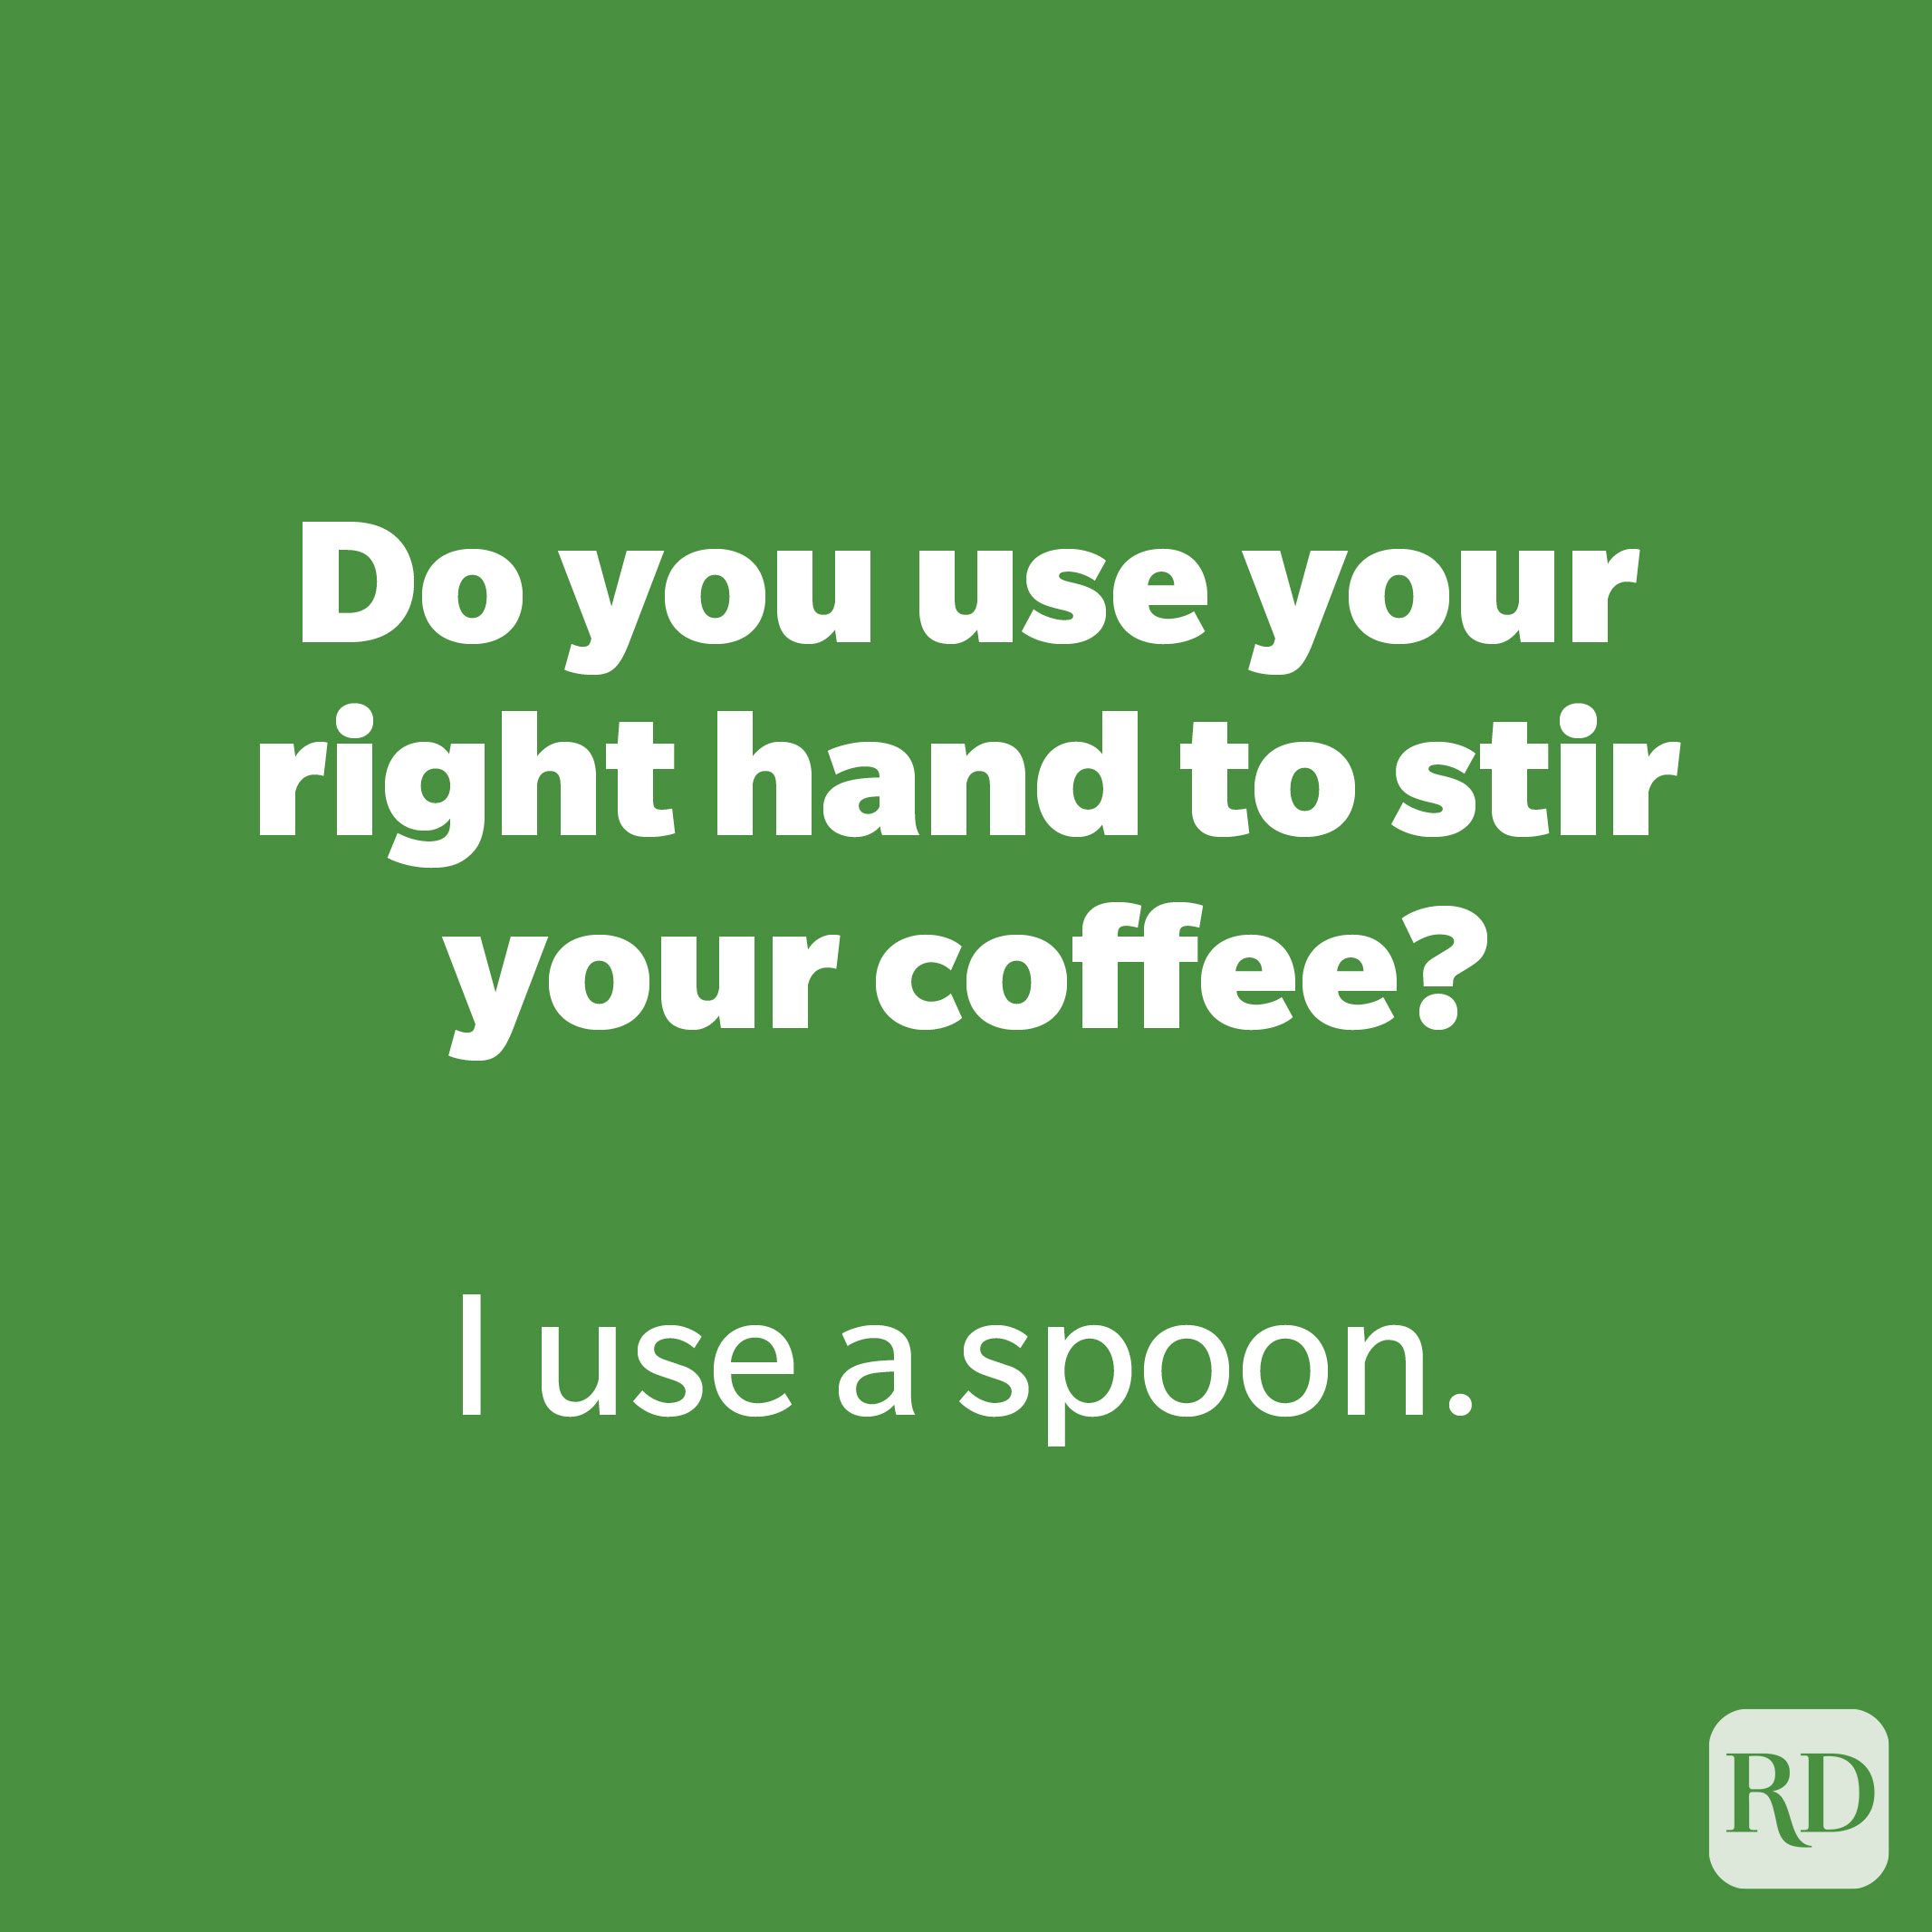 Do you use your right hand to stir your coffee?